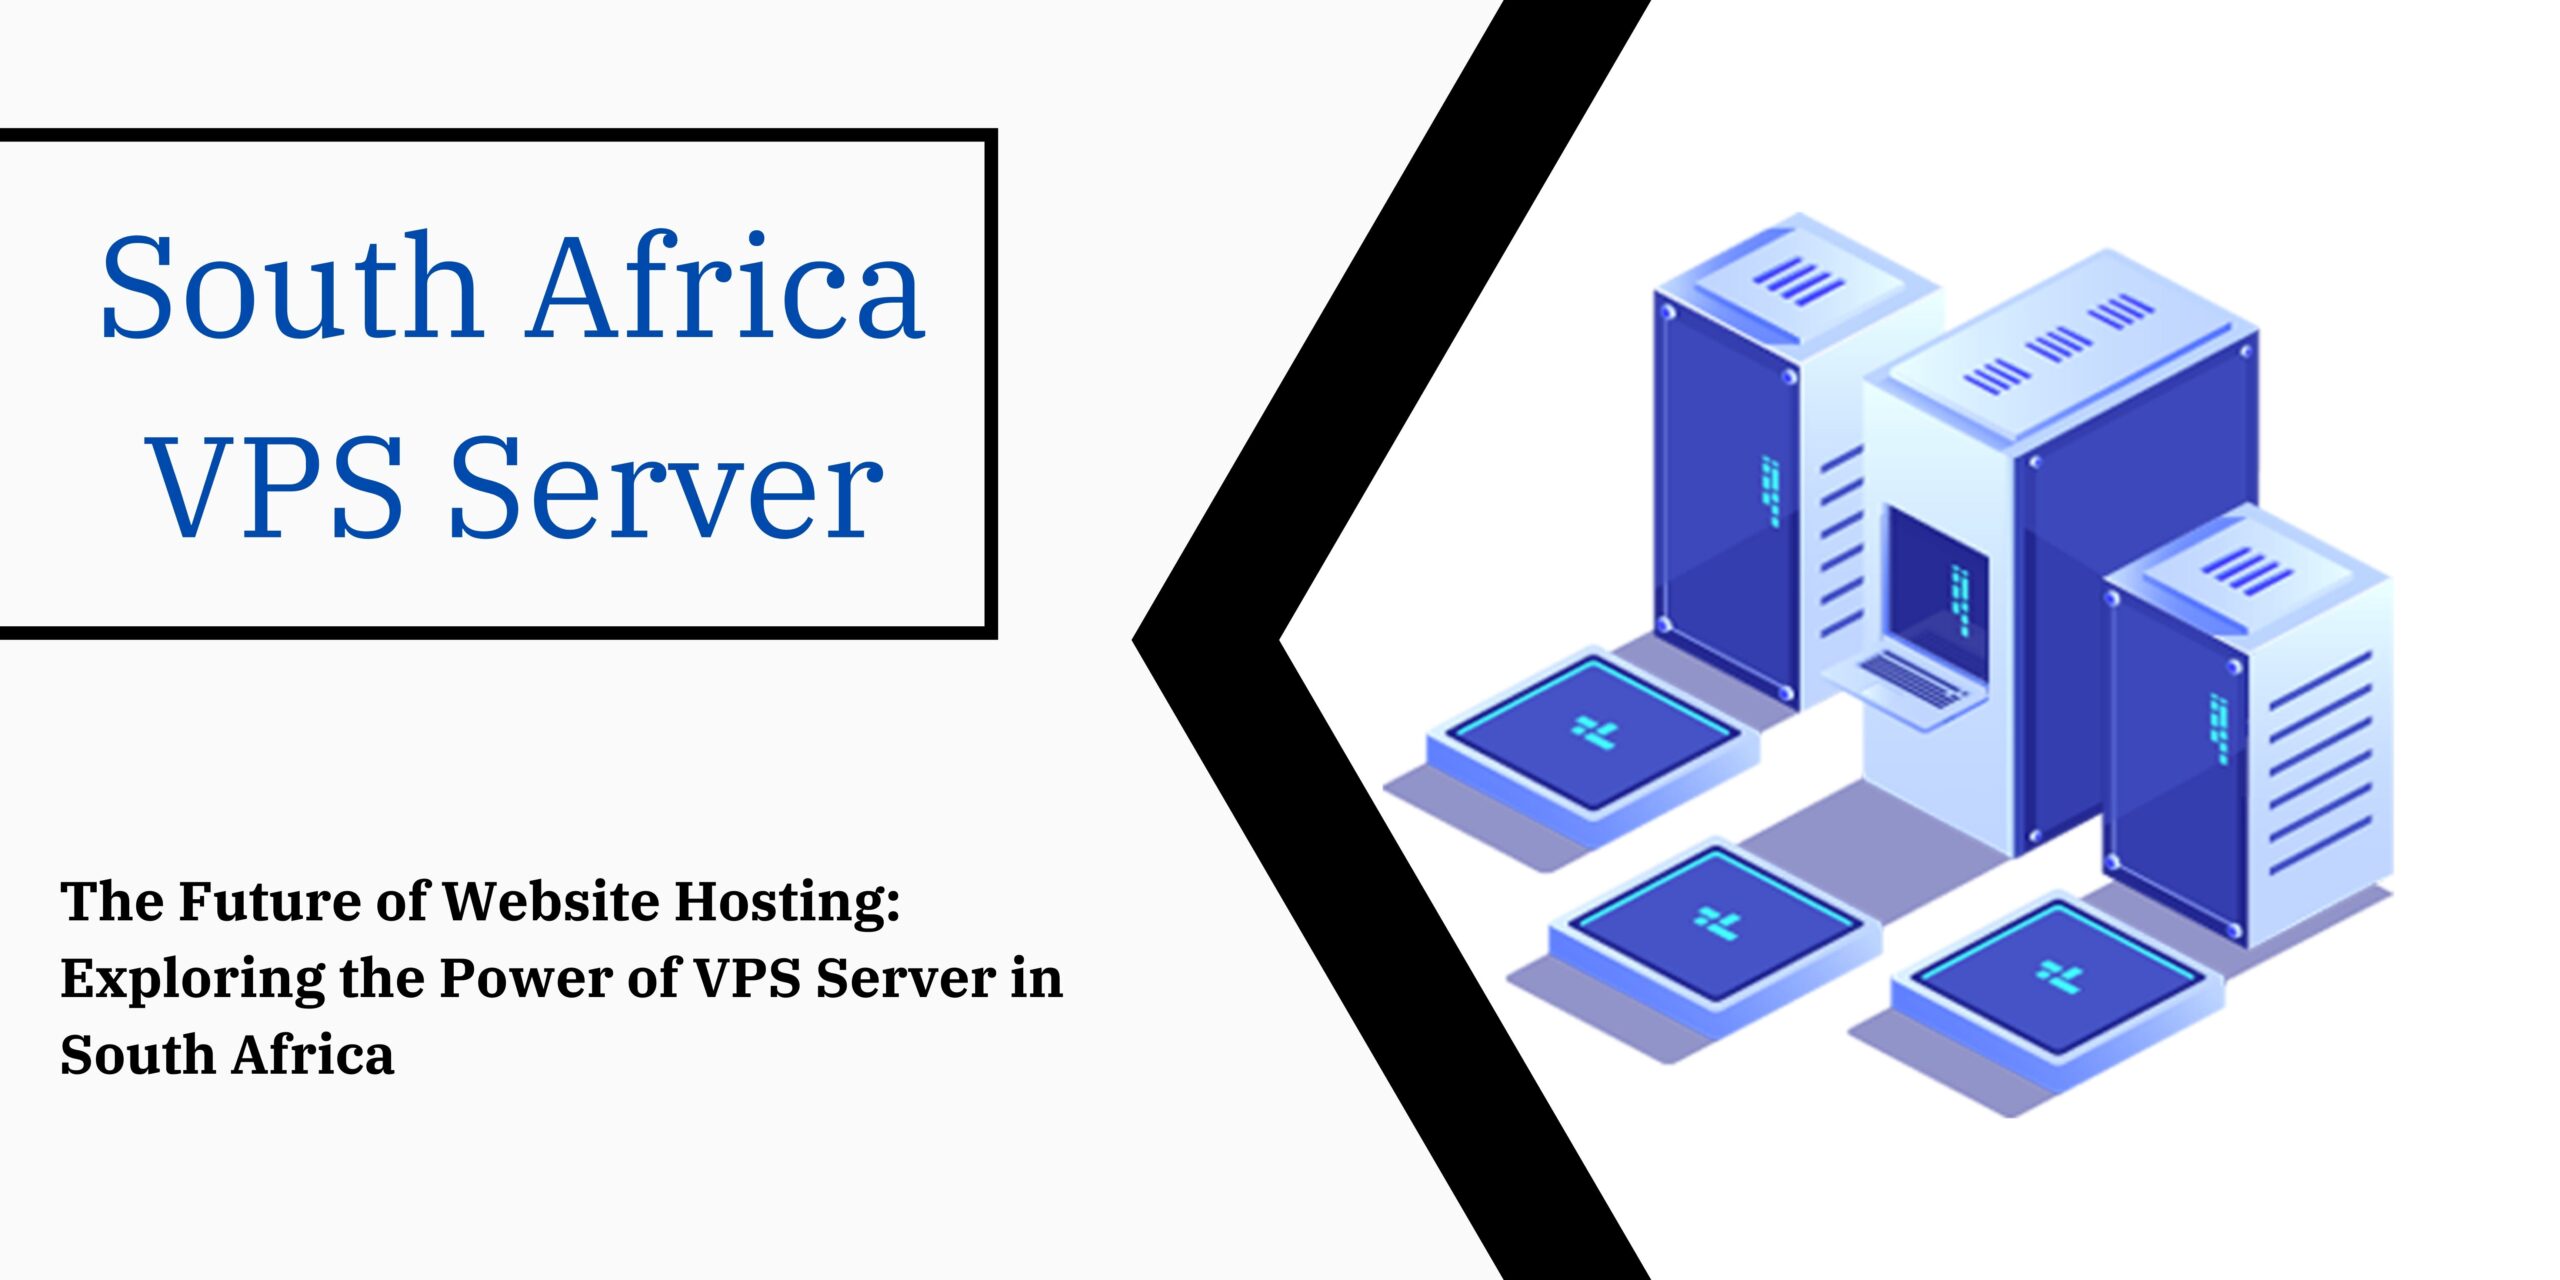 VPS Server in South Africa Exploring The Future of Web Hosting